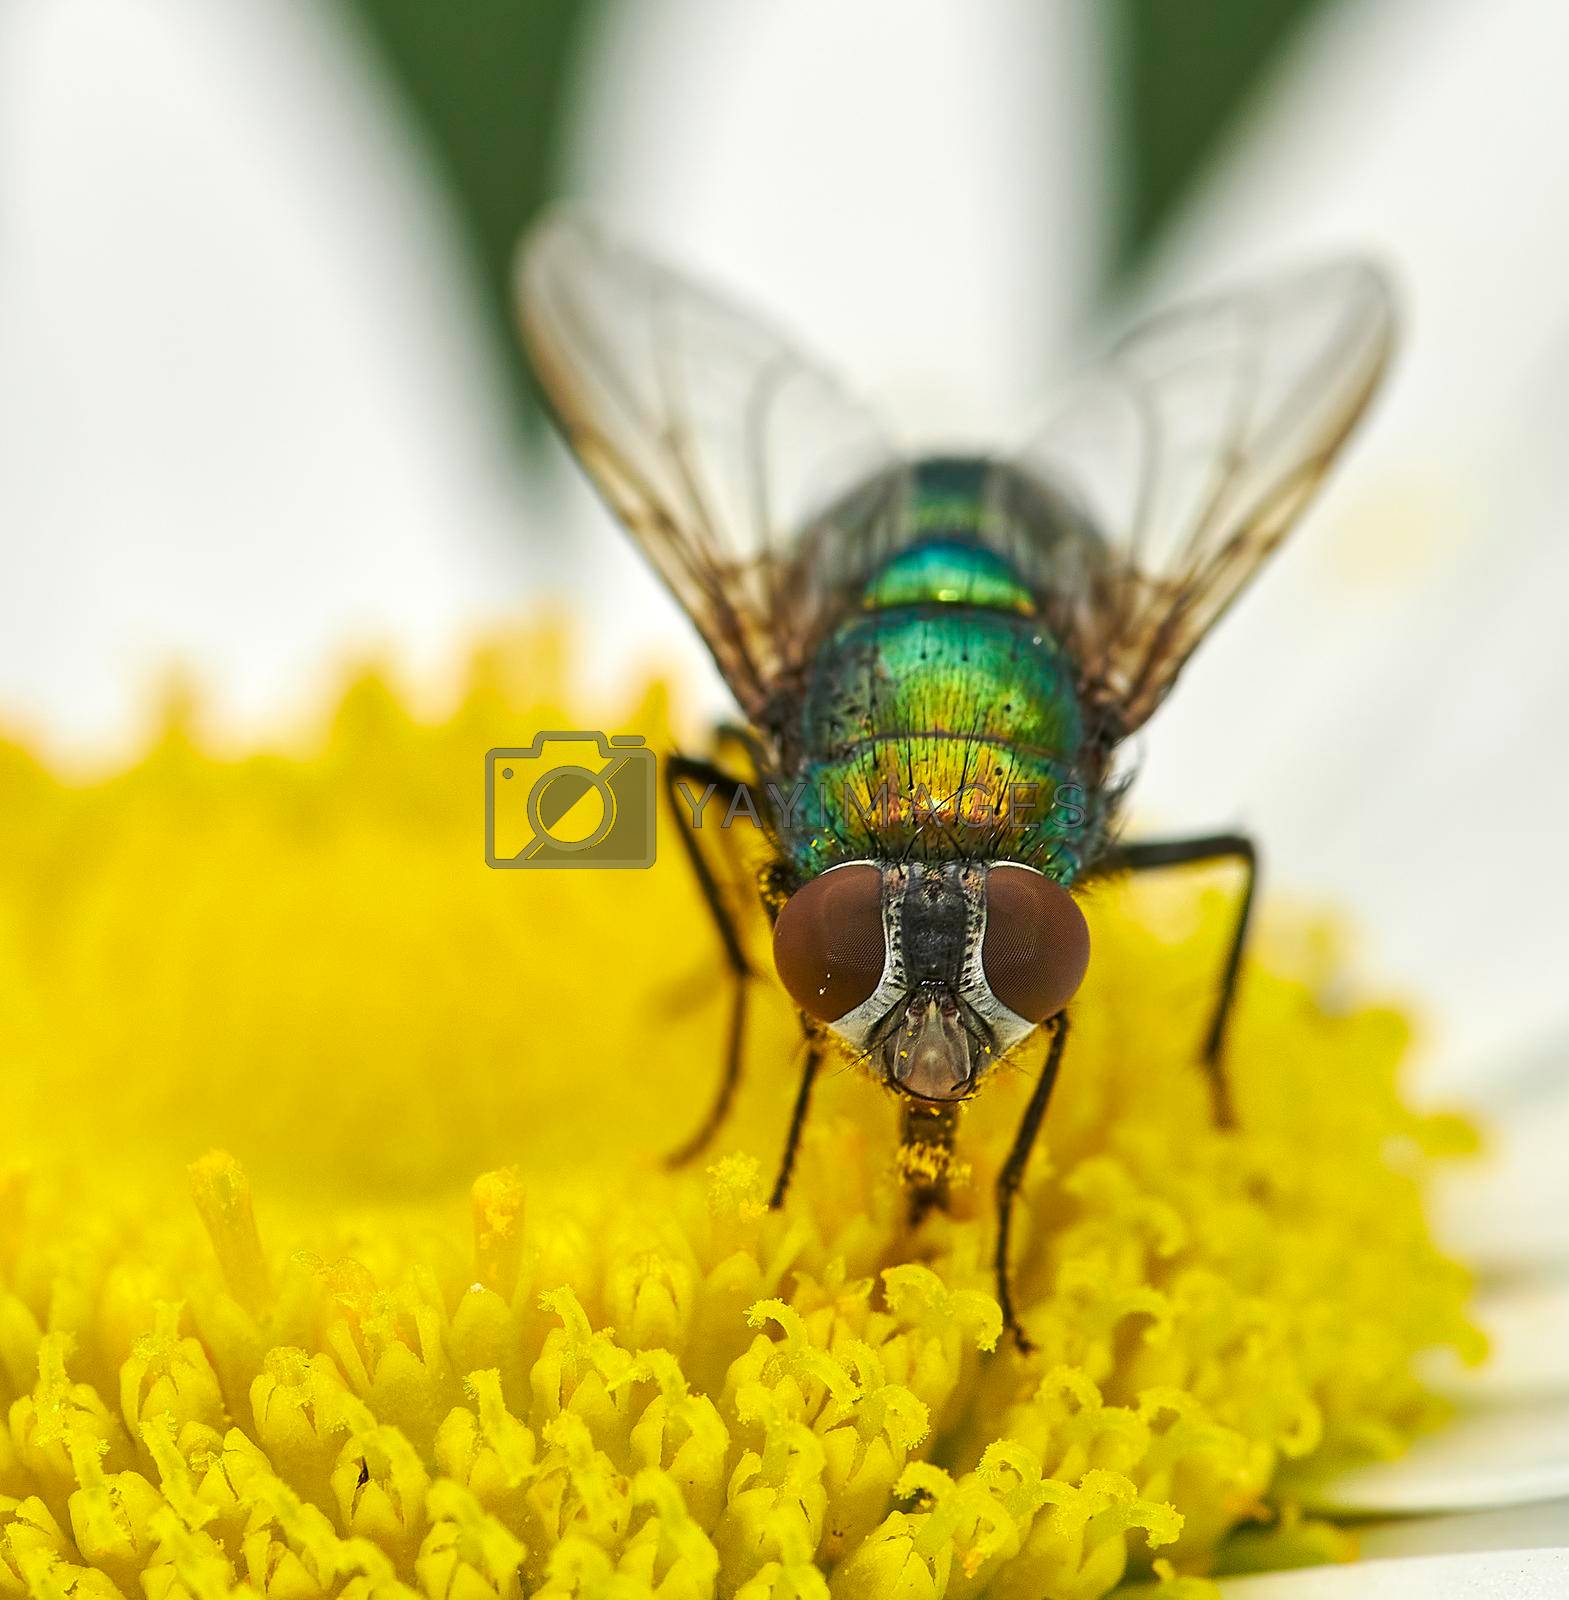 Royalty free image of Closeup of a fly on a yellow daisy flower outside. The common blowfly harvests nectar from the stamen of a chamomile plant. Zoom in on a blowfly pollinating a garden plant in summer by YuriArcurs